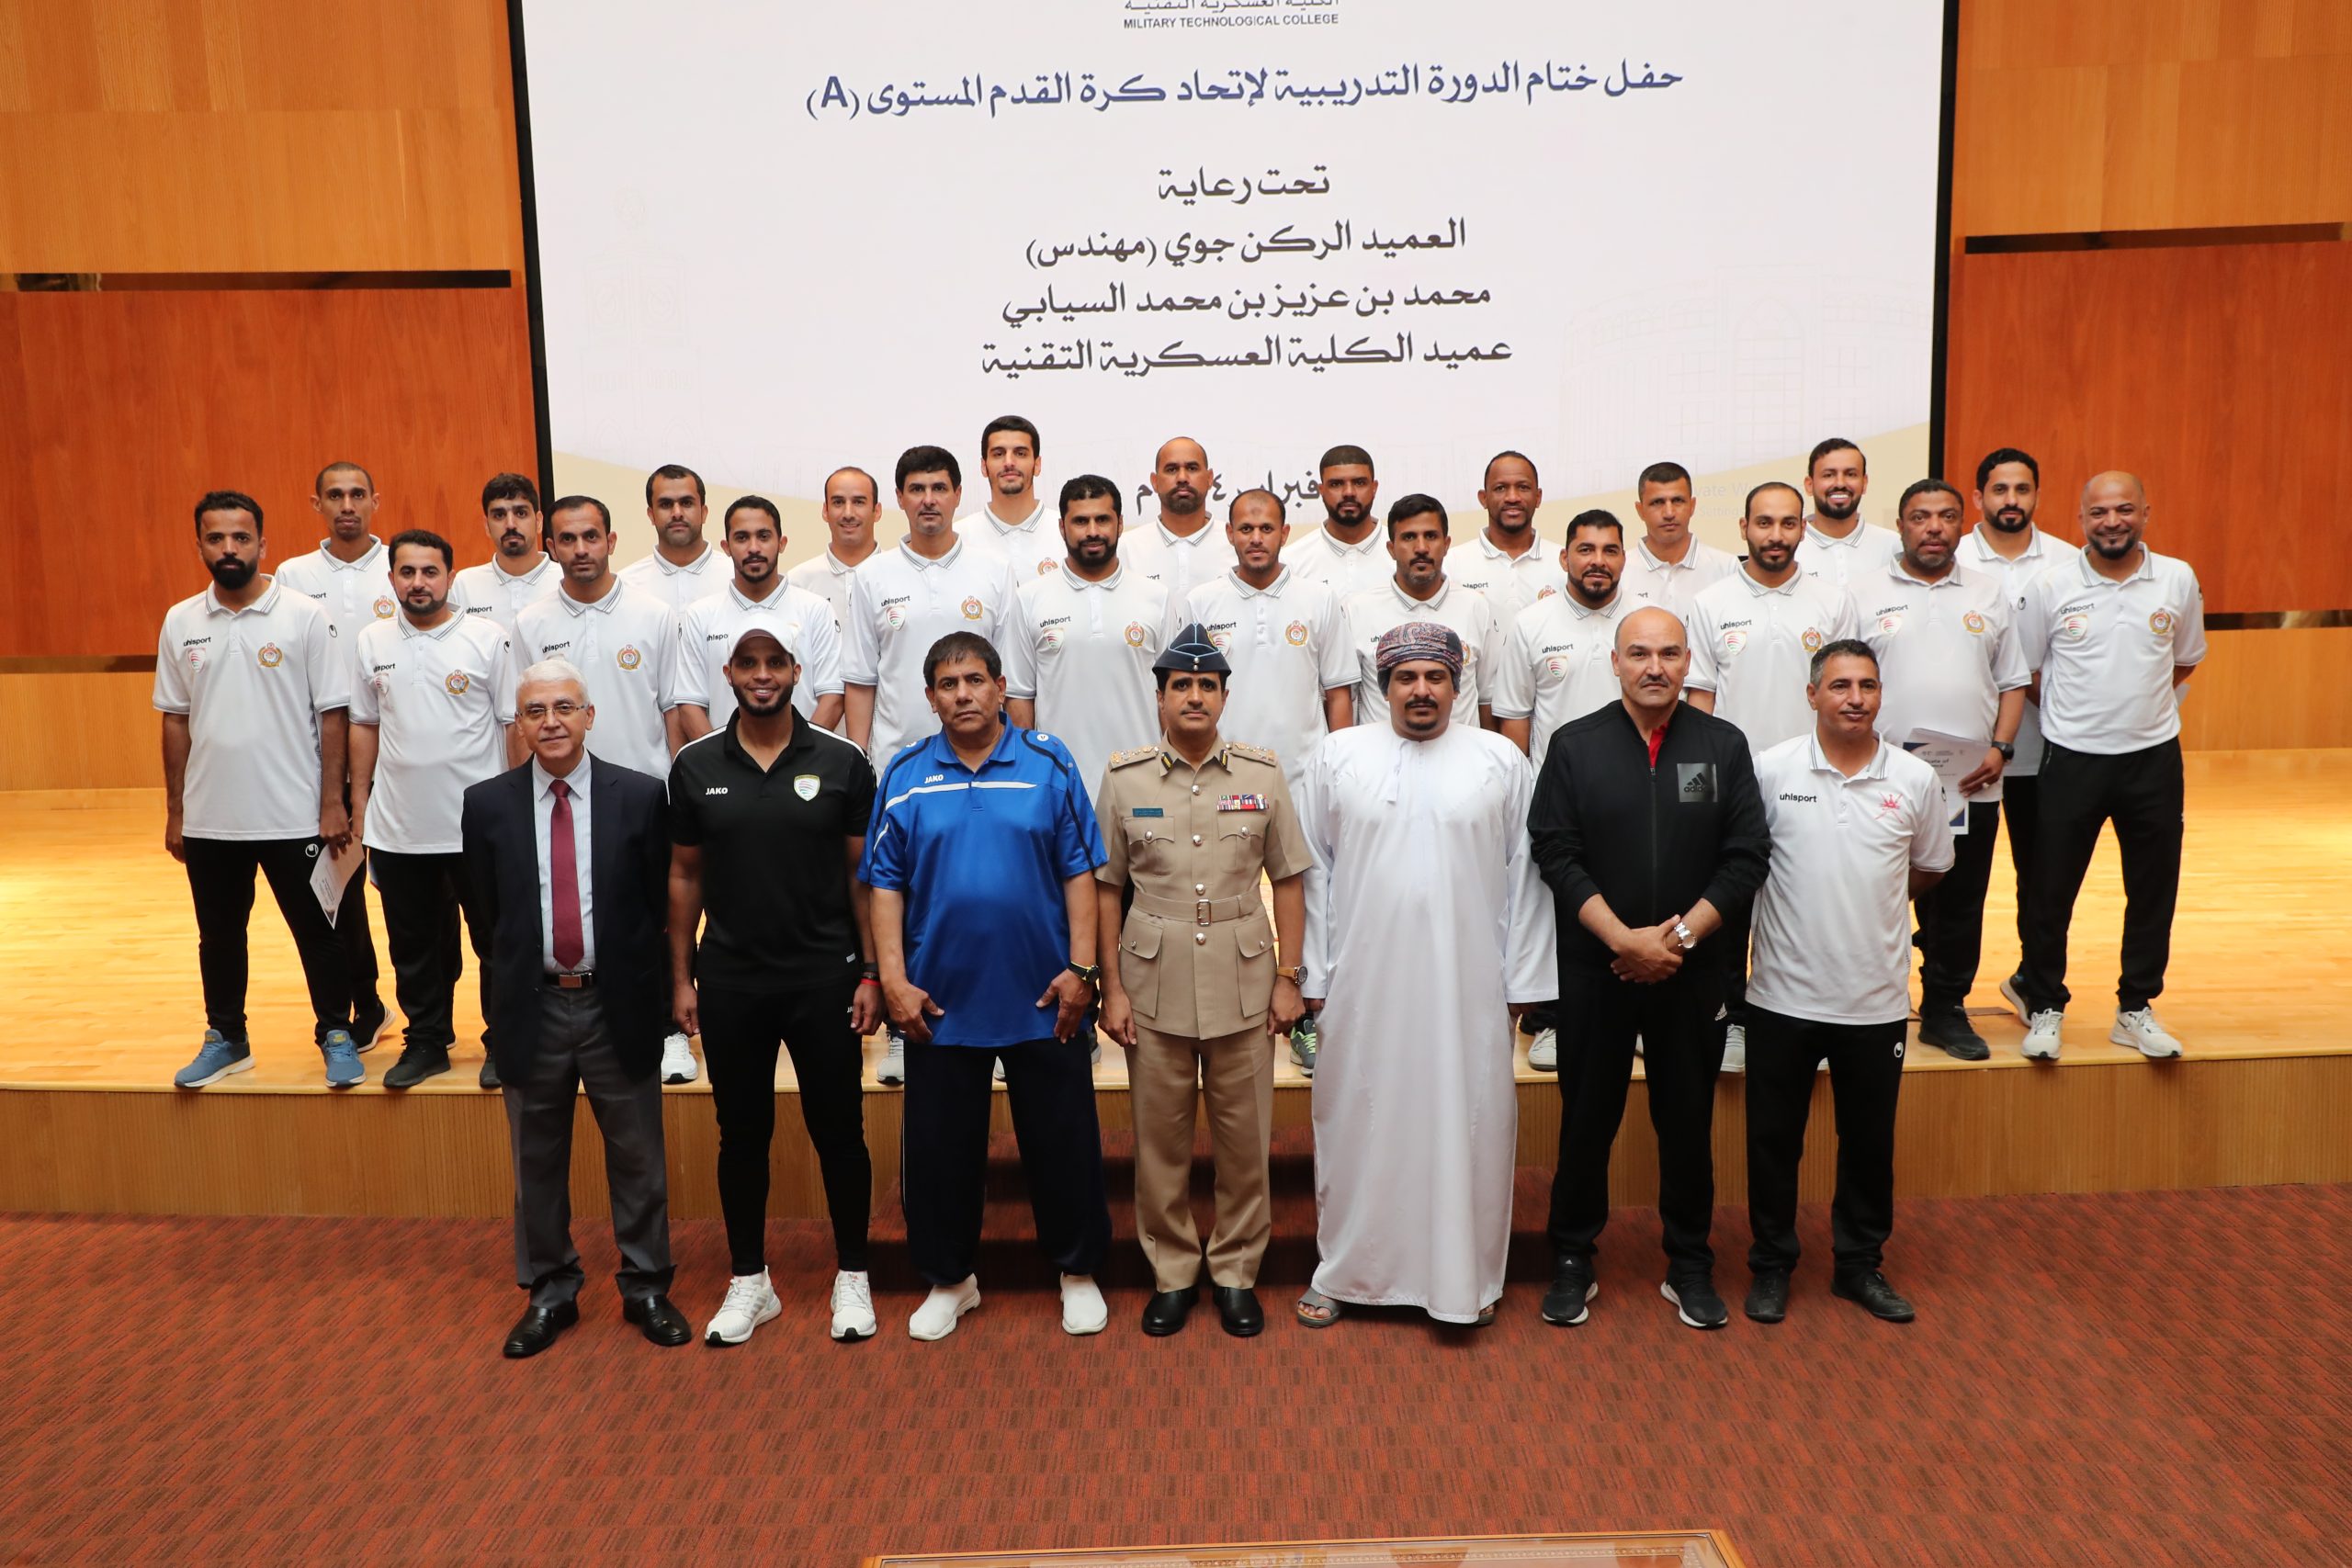 Conclusion of the training course of the football federation level (A)” class=”wplp_thumb” /></span></a><a href=